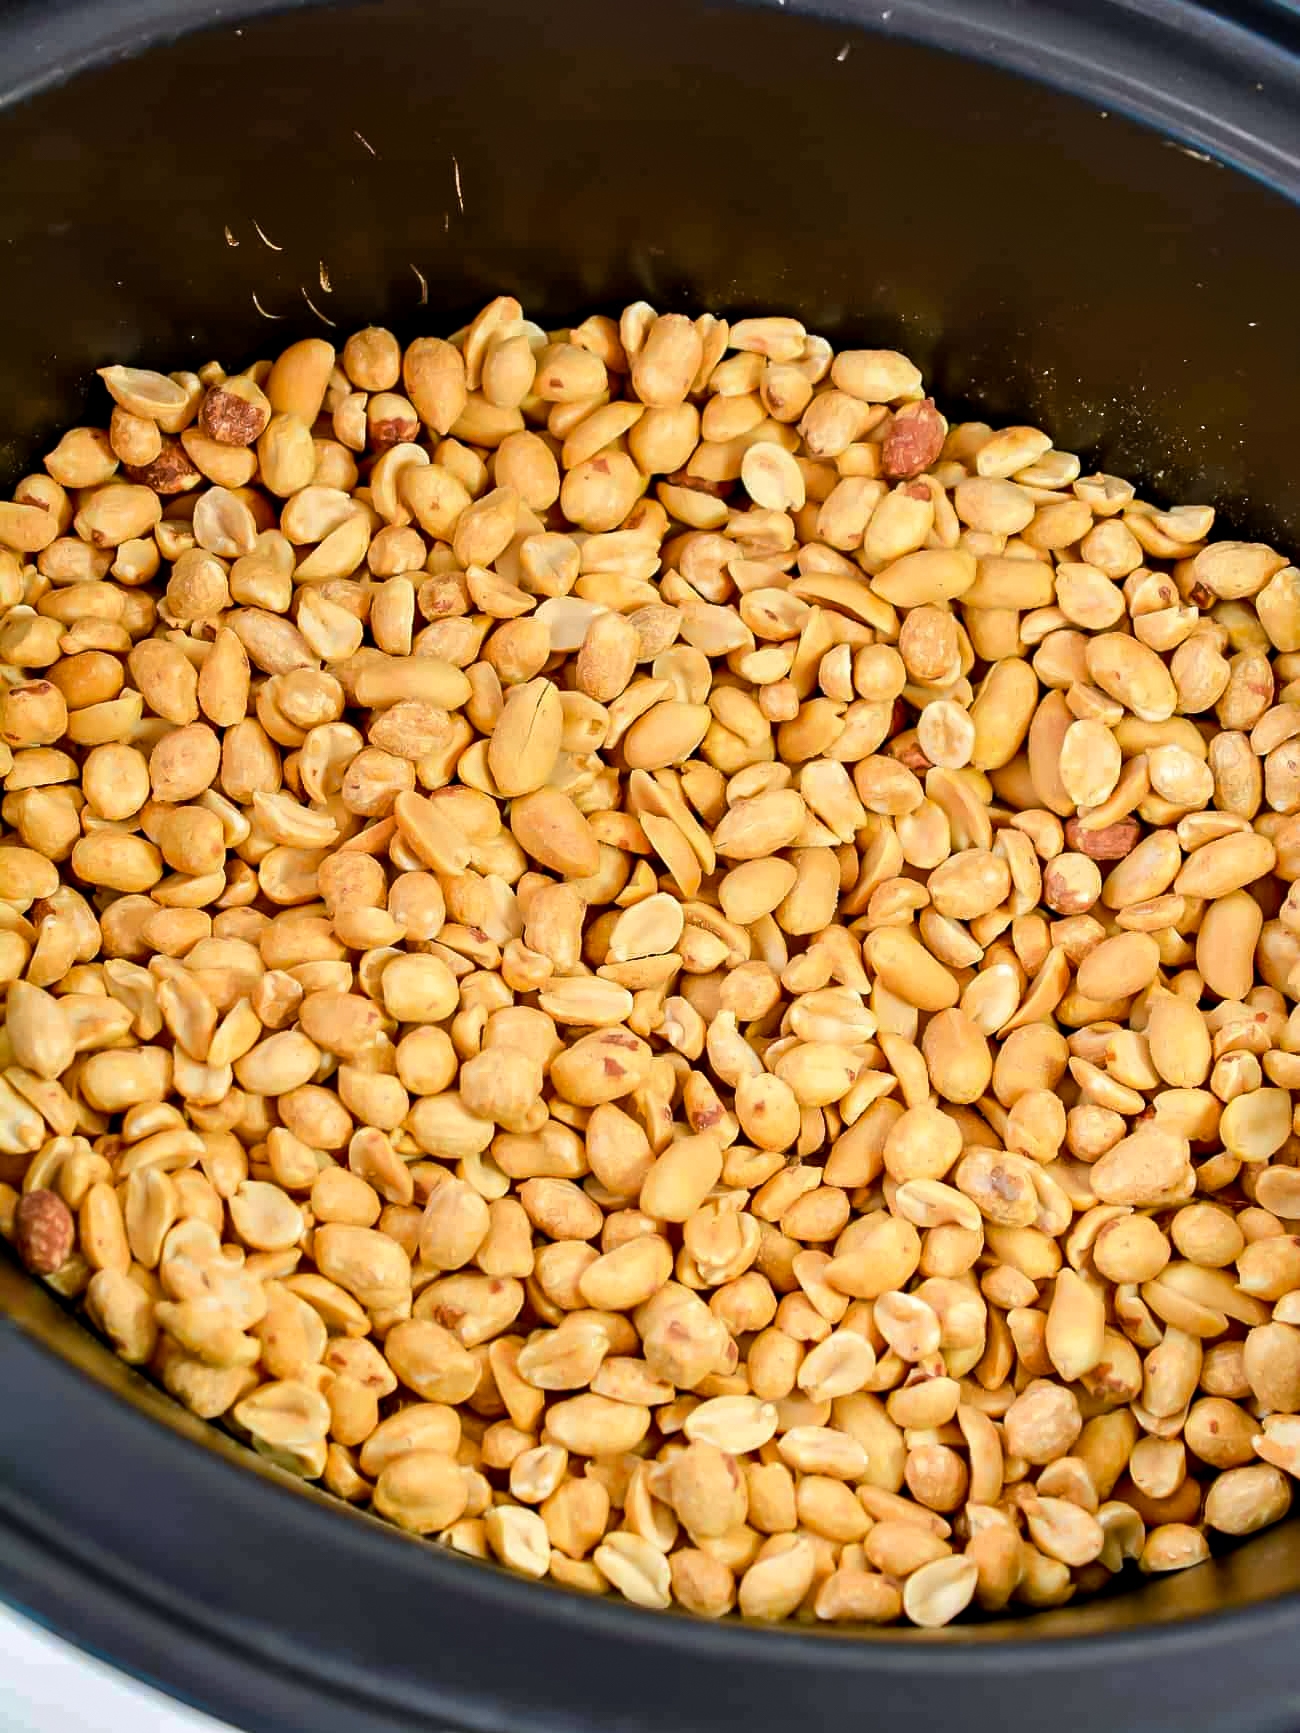 Place the peanuts into the bottom of the slow cooker.